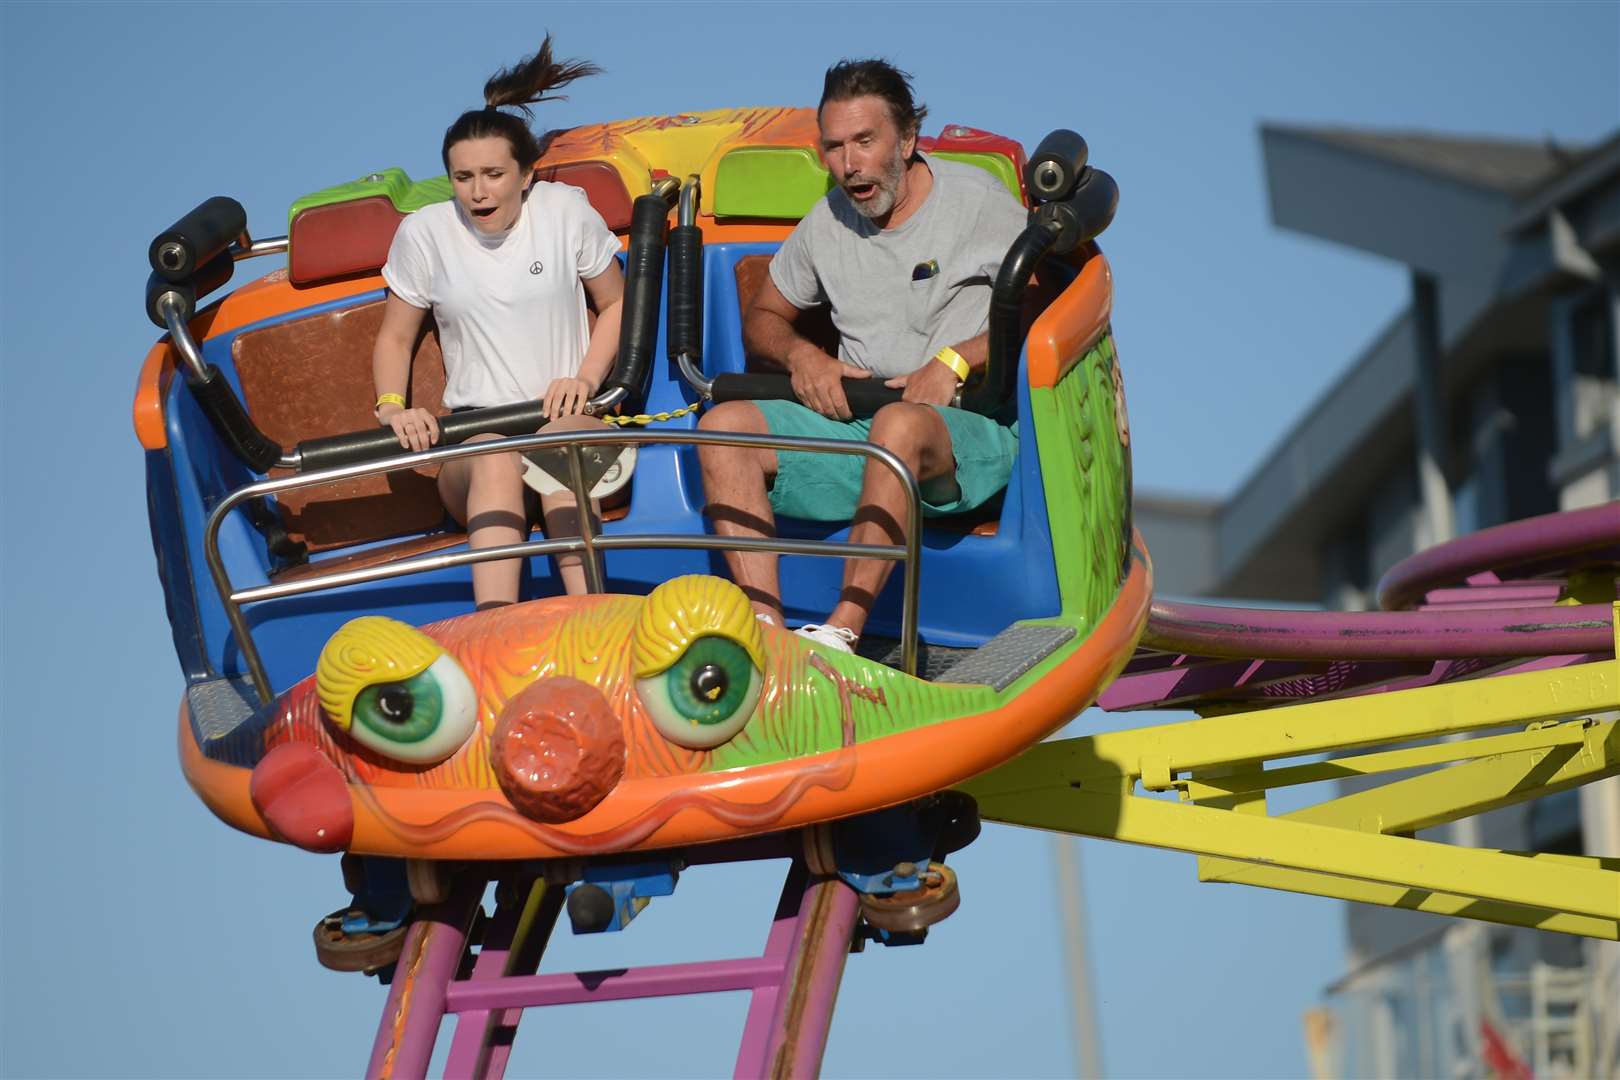 Dreamland Margate could be the perfect place for all the family